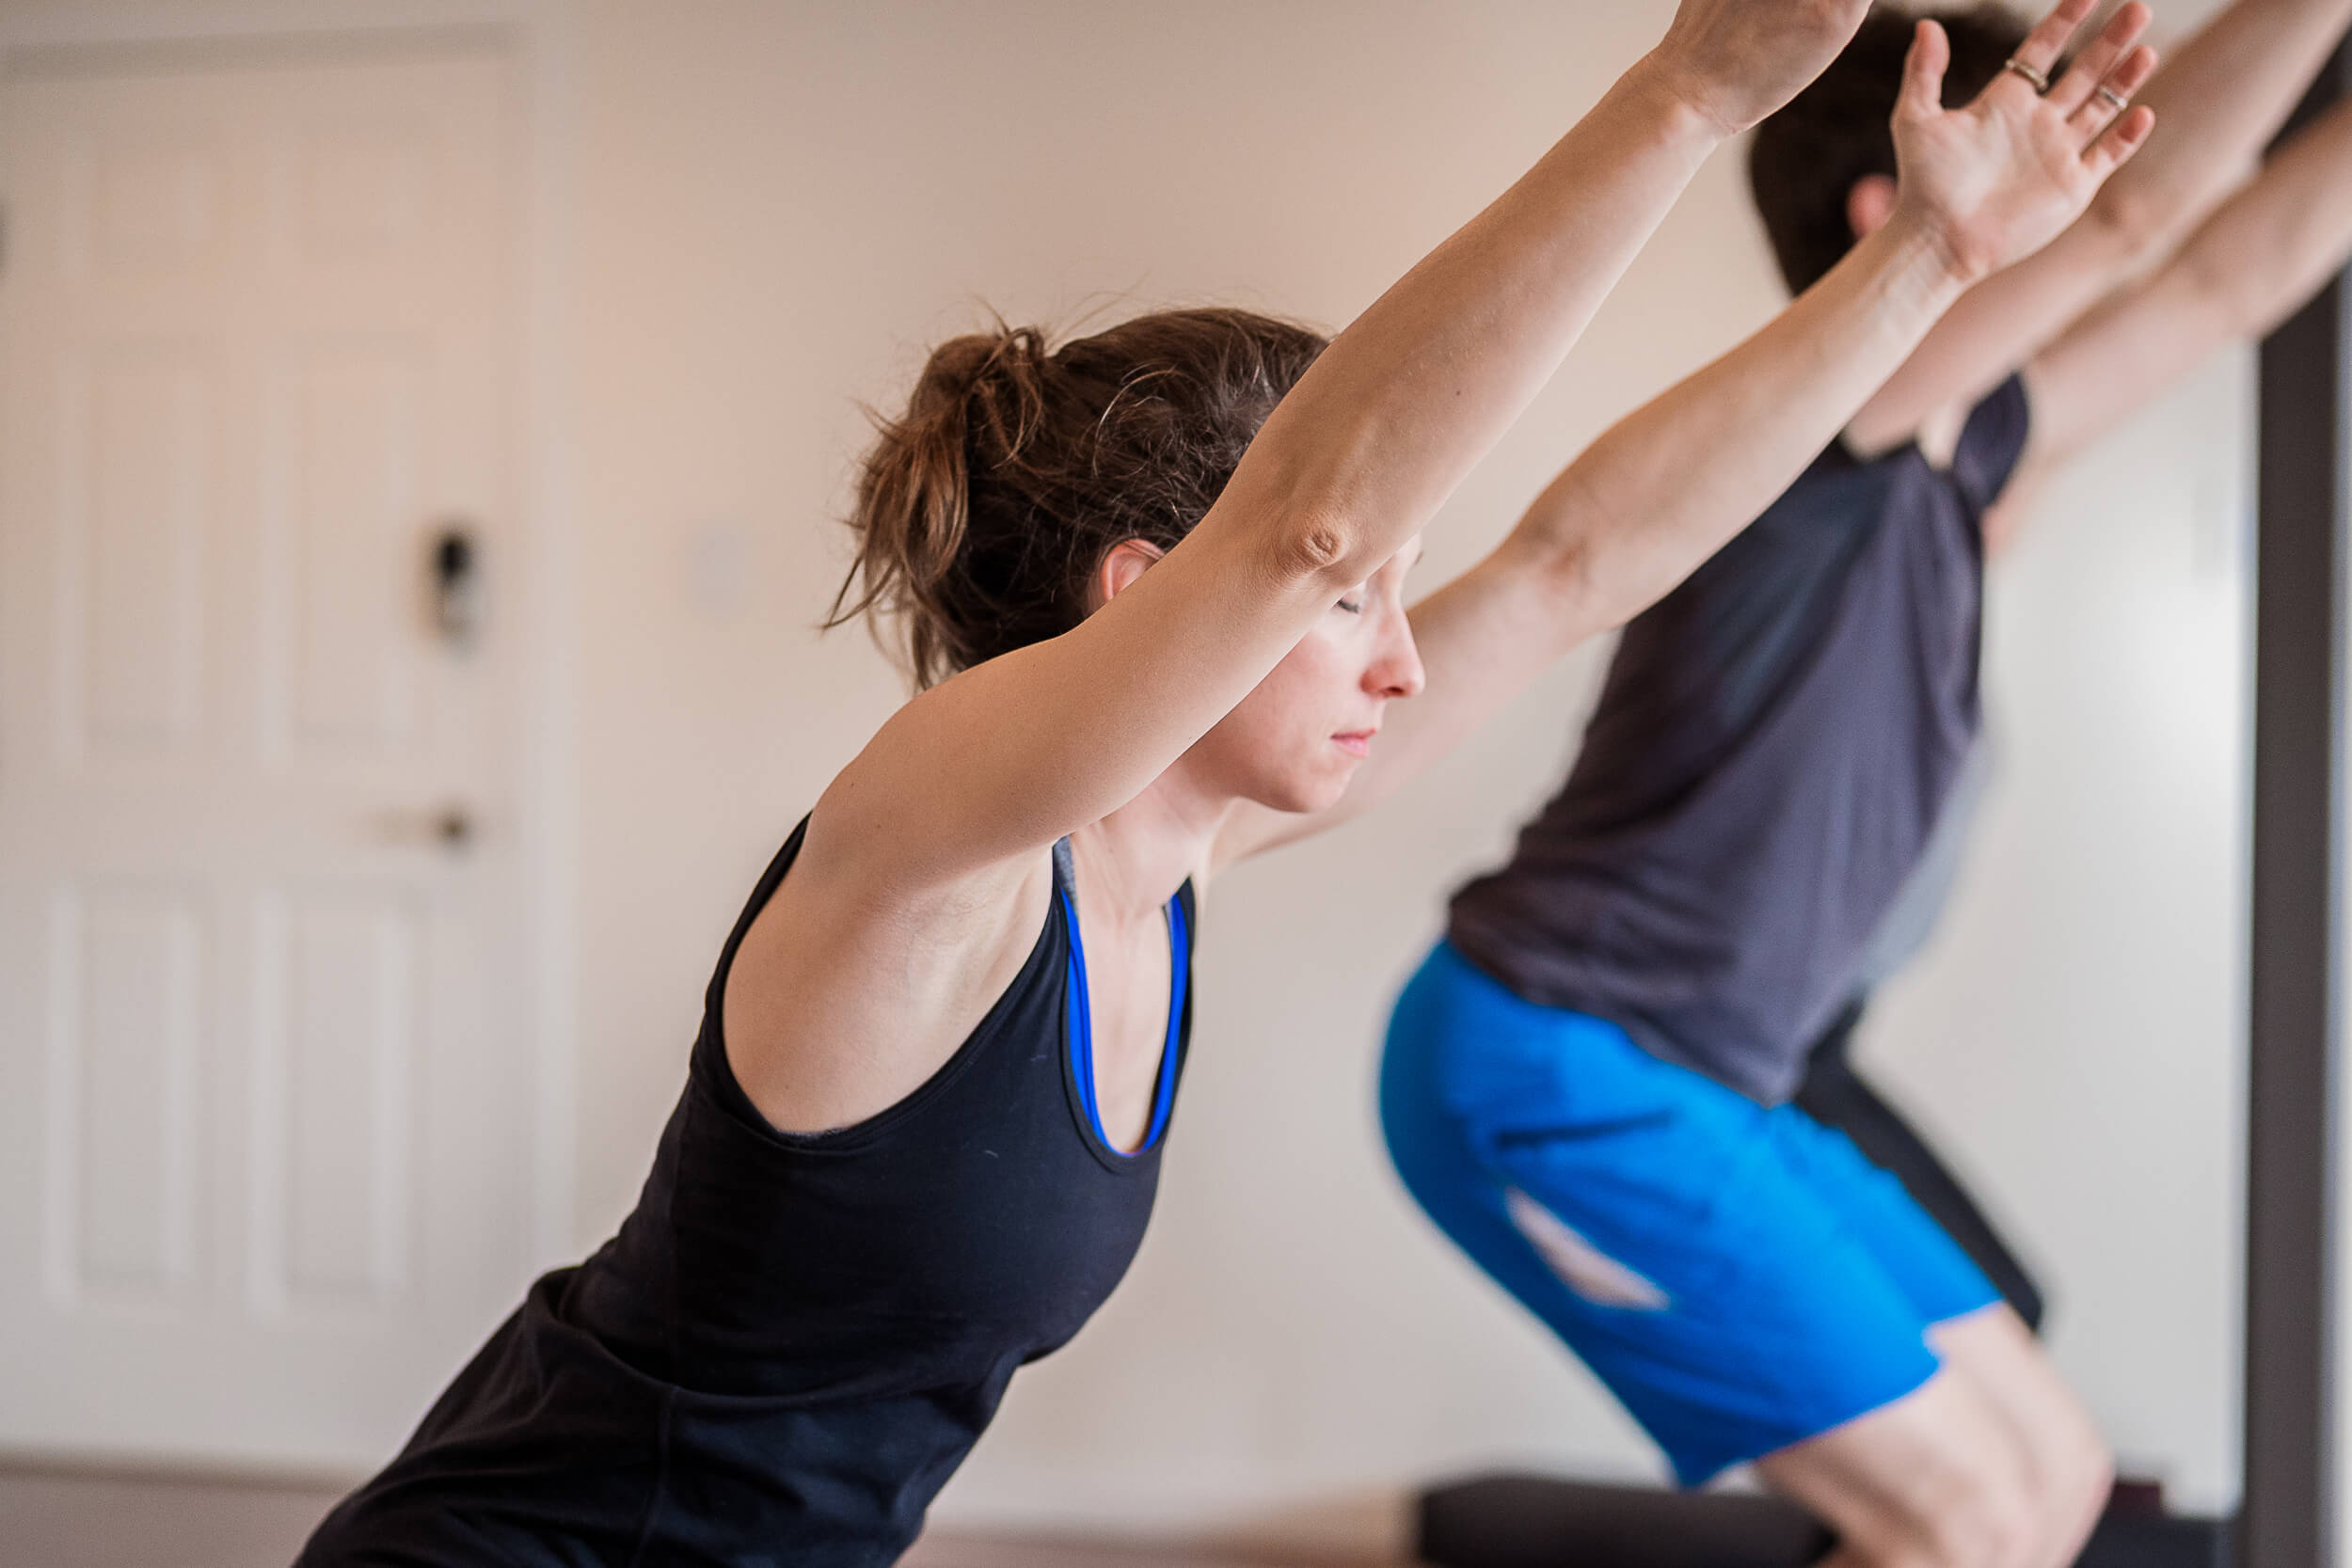 Focused participants at Shala Yoga studio in Squamish practicing Warrior I pose, highlighting the concentration and strength building aspect of yoga in a serene studio environment.